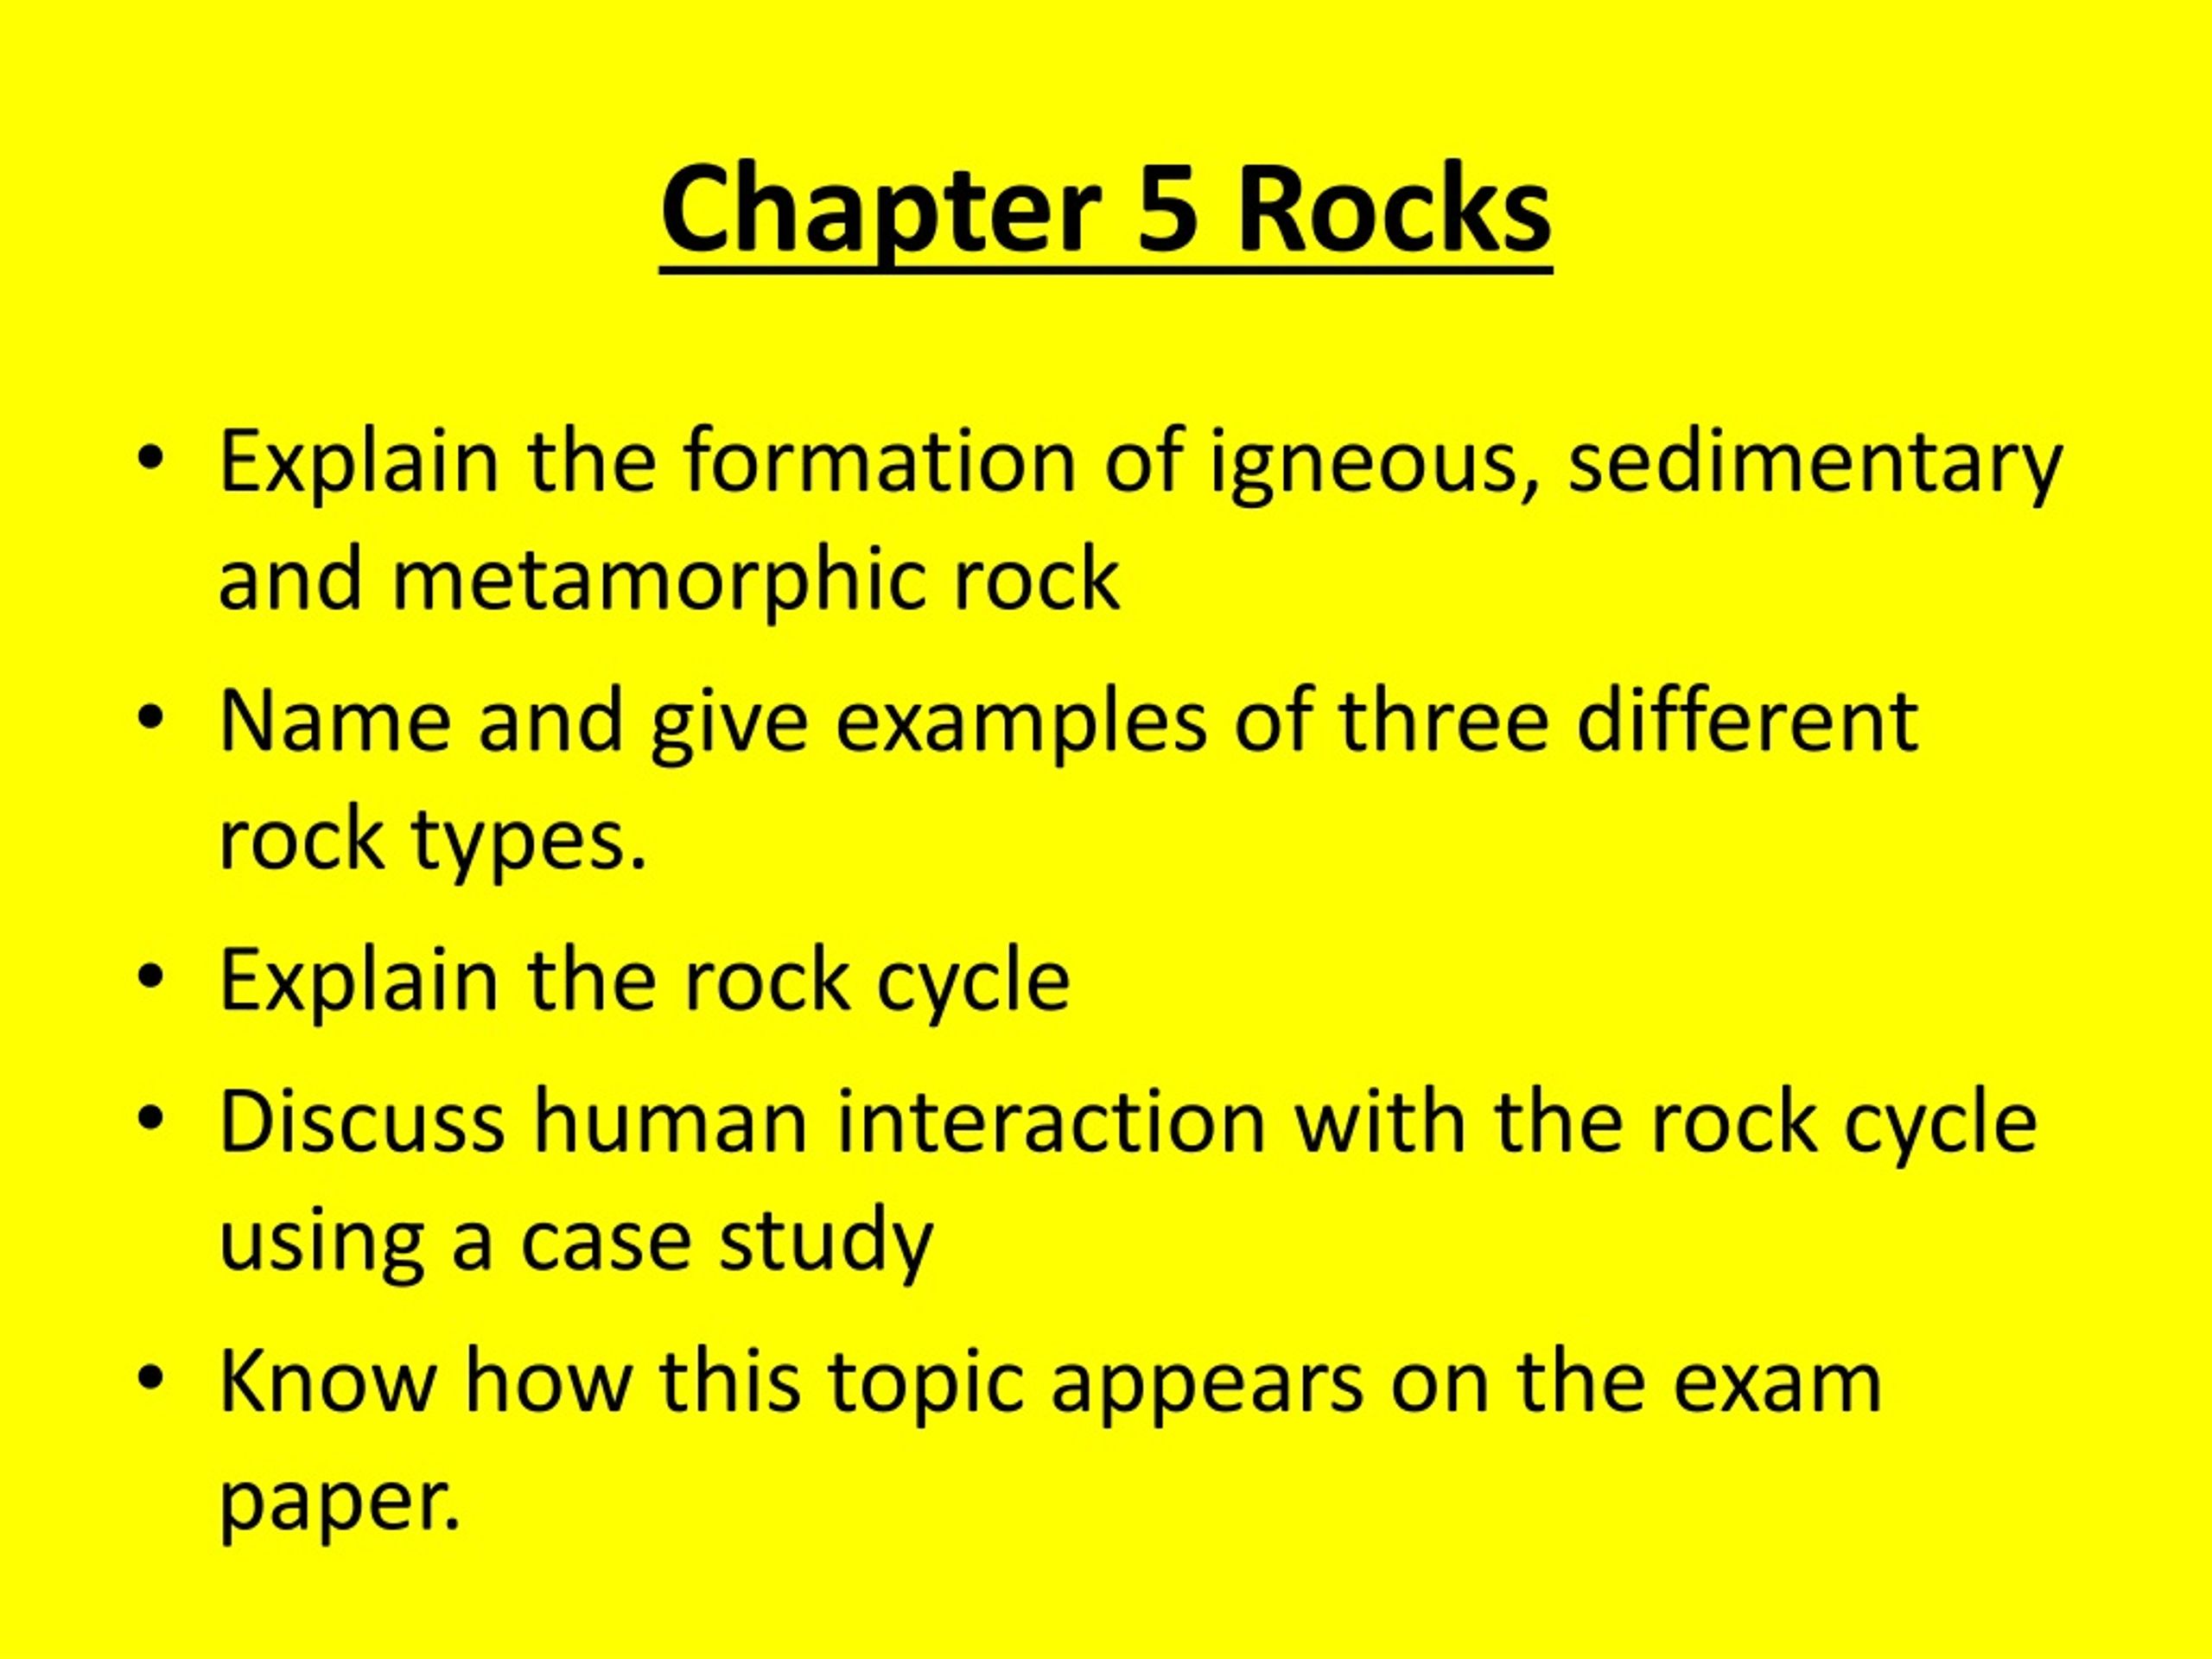 Metamorphic Rocks – Definition, Formation, Types, & Examples